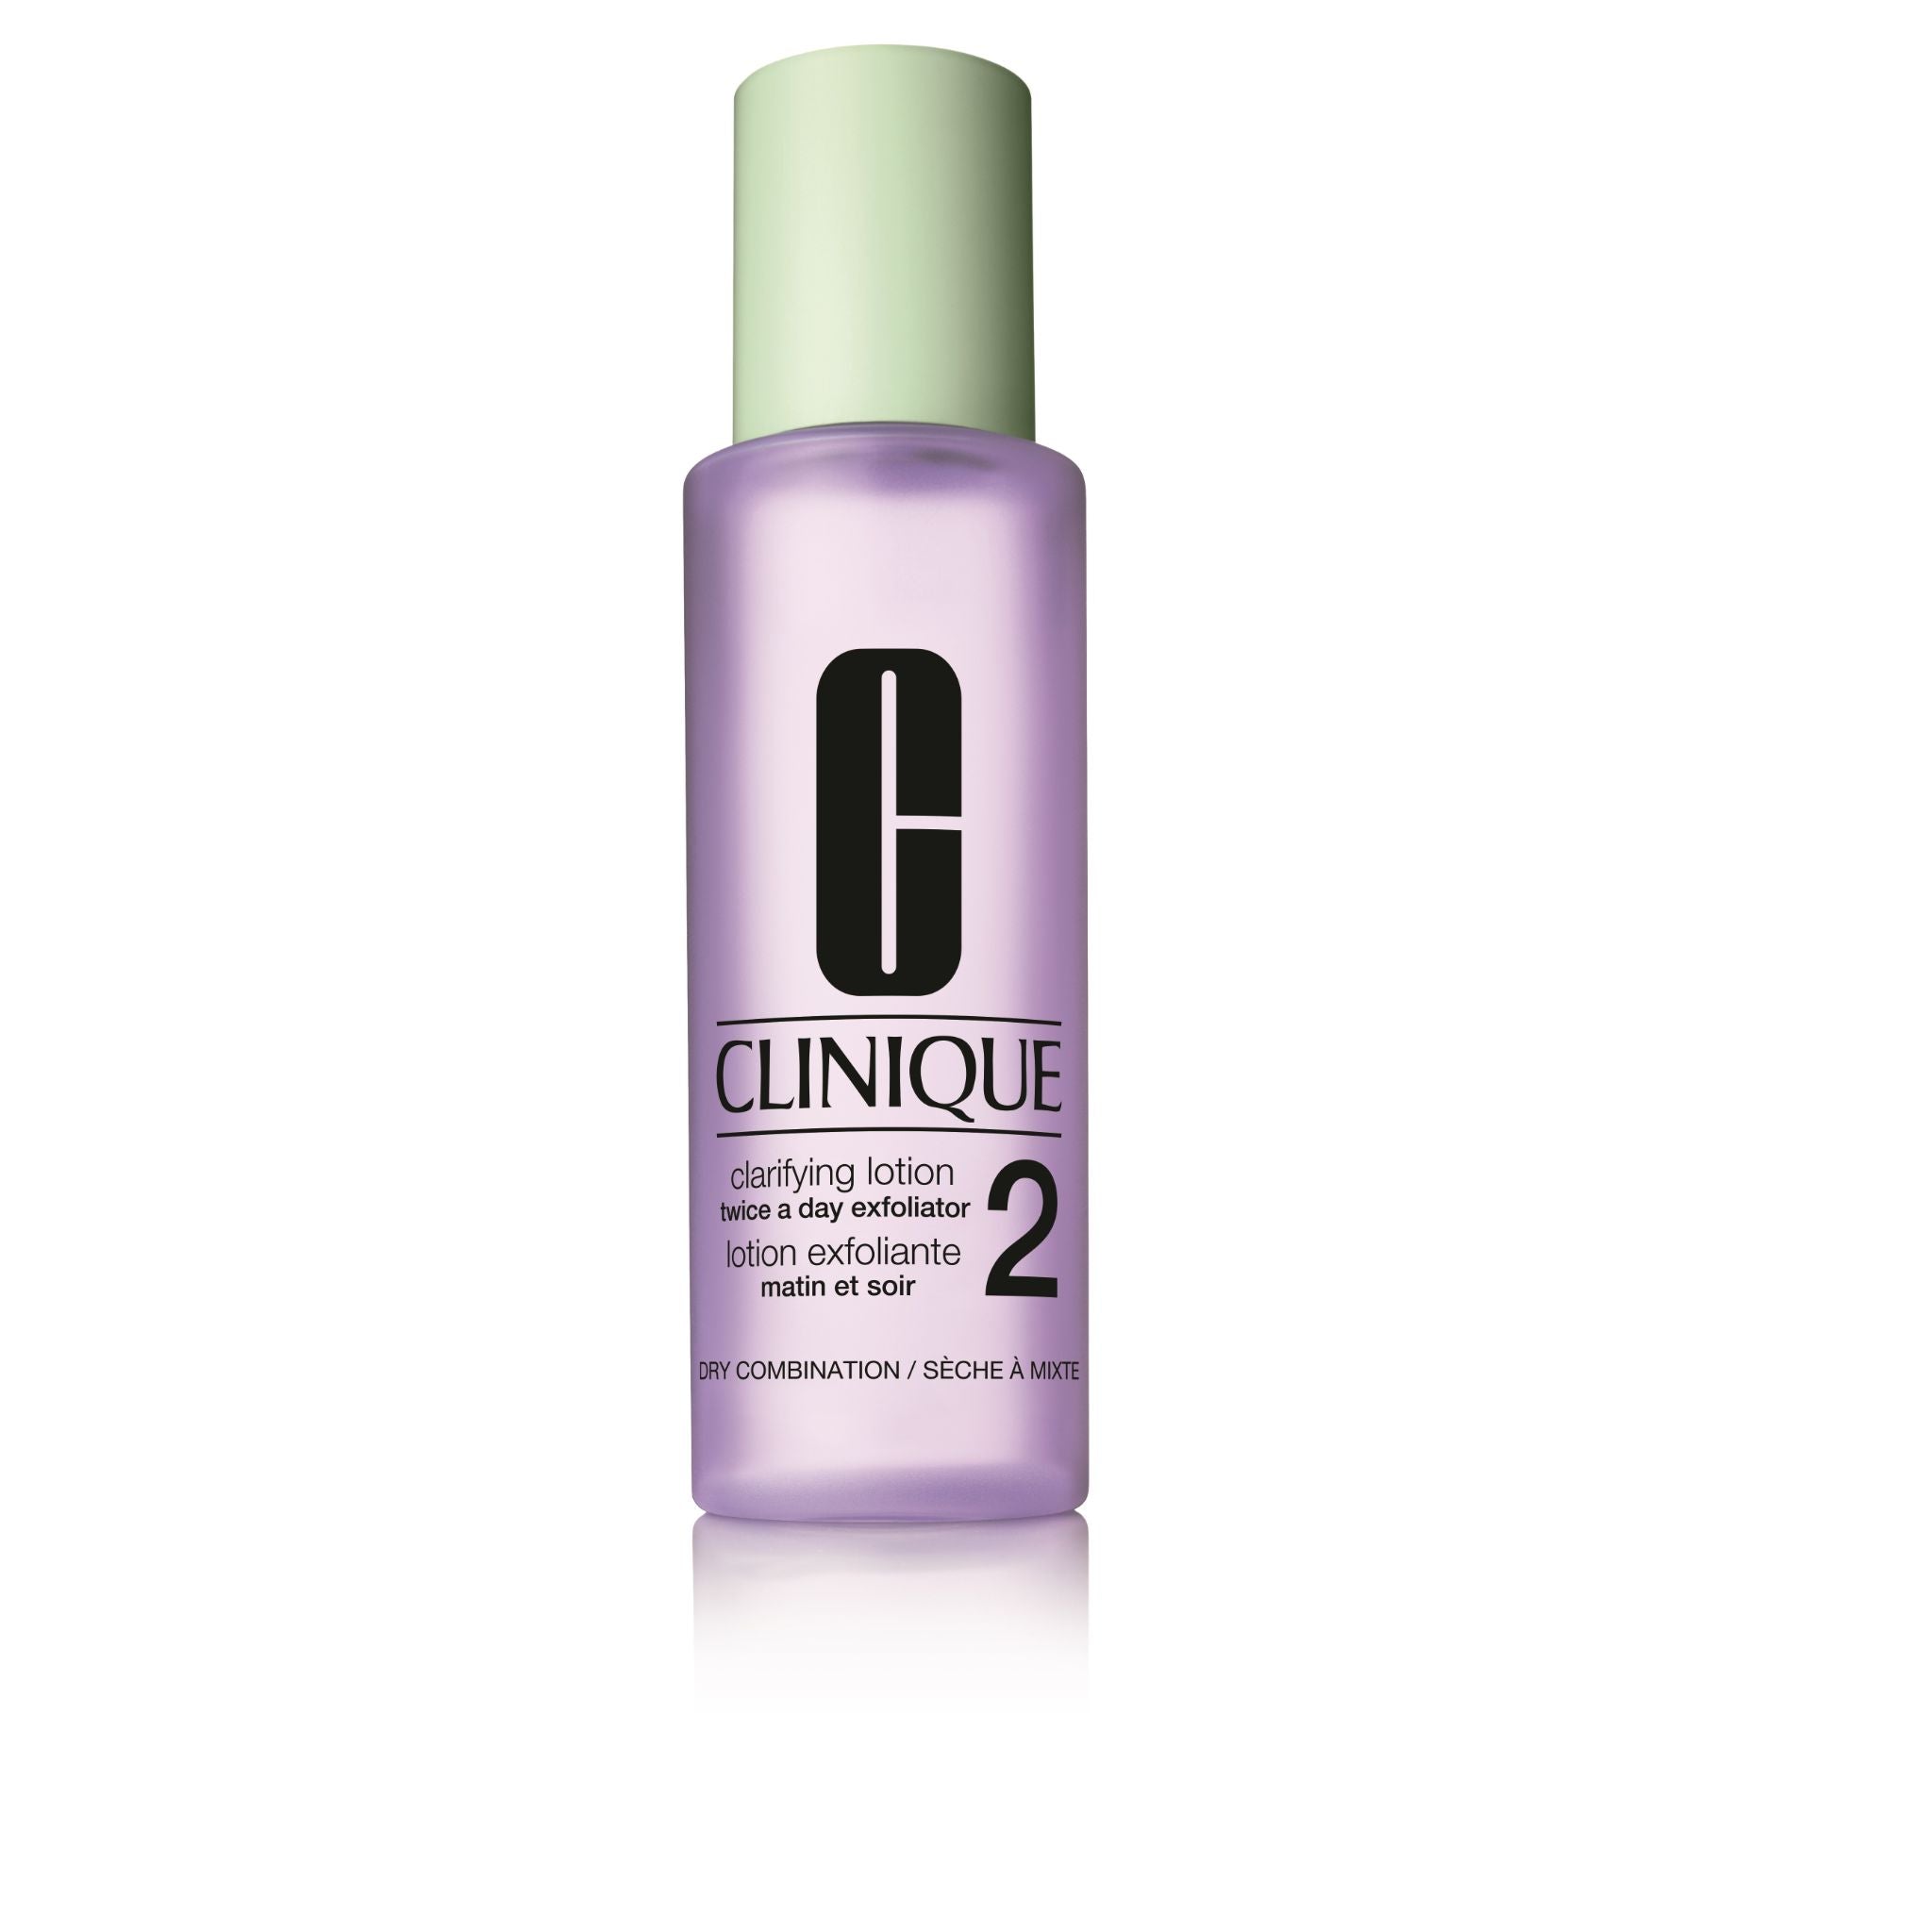 Clinique Clarifying Lotion 2 - 200ml